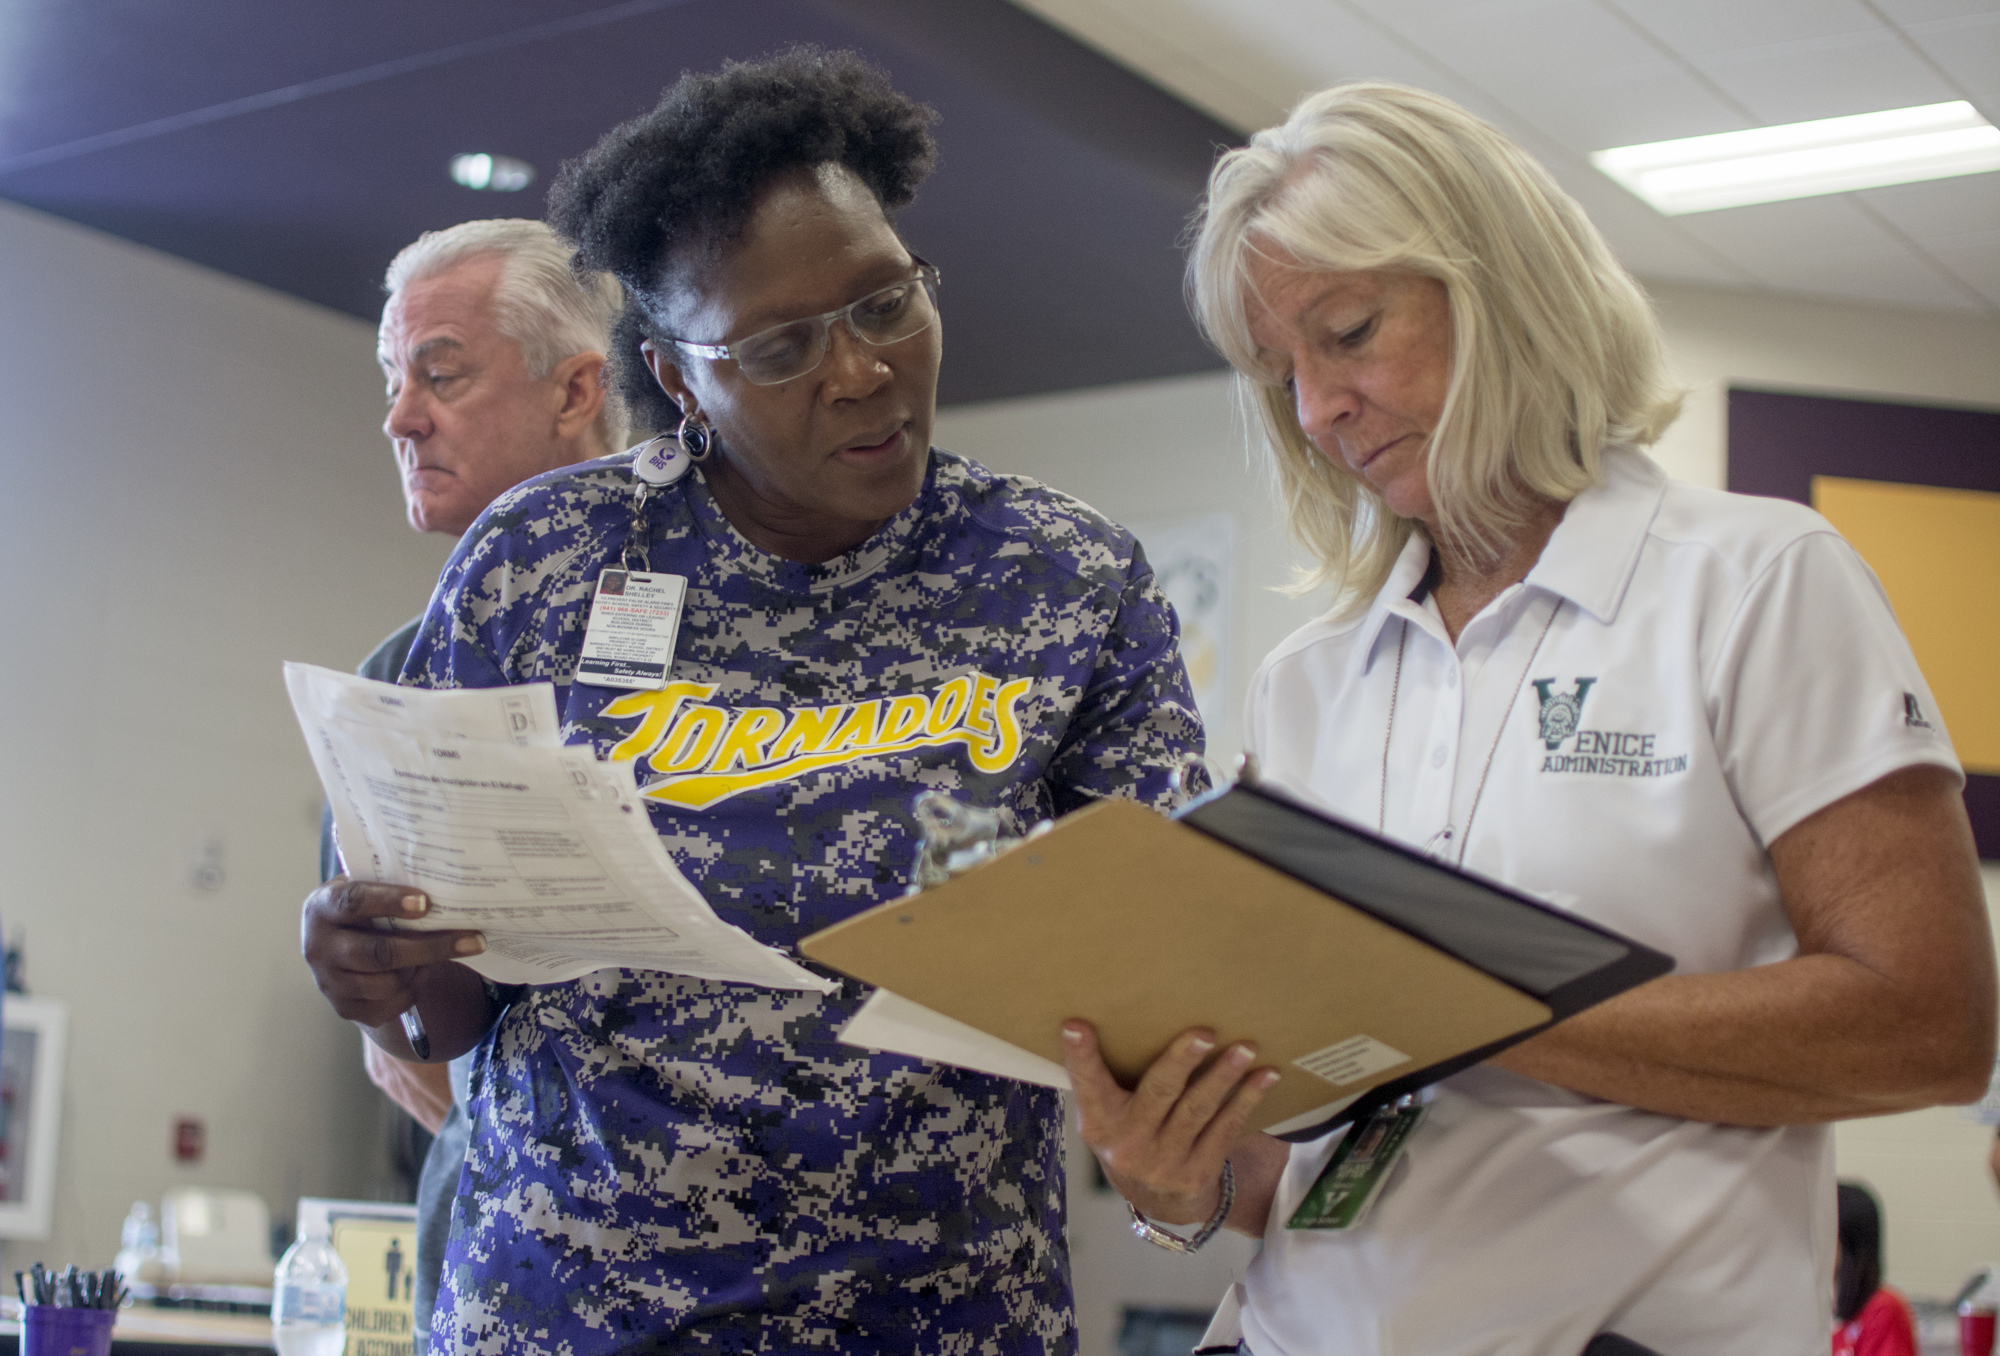 Booker High School Principal Rachel Shelley and Assistant Principal in charge of Administration at Venice High School Melanie Ritter look over paperwork at Booker High School on Saturday.  